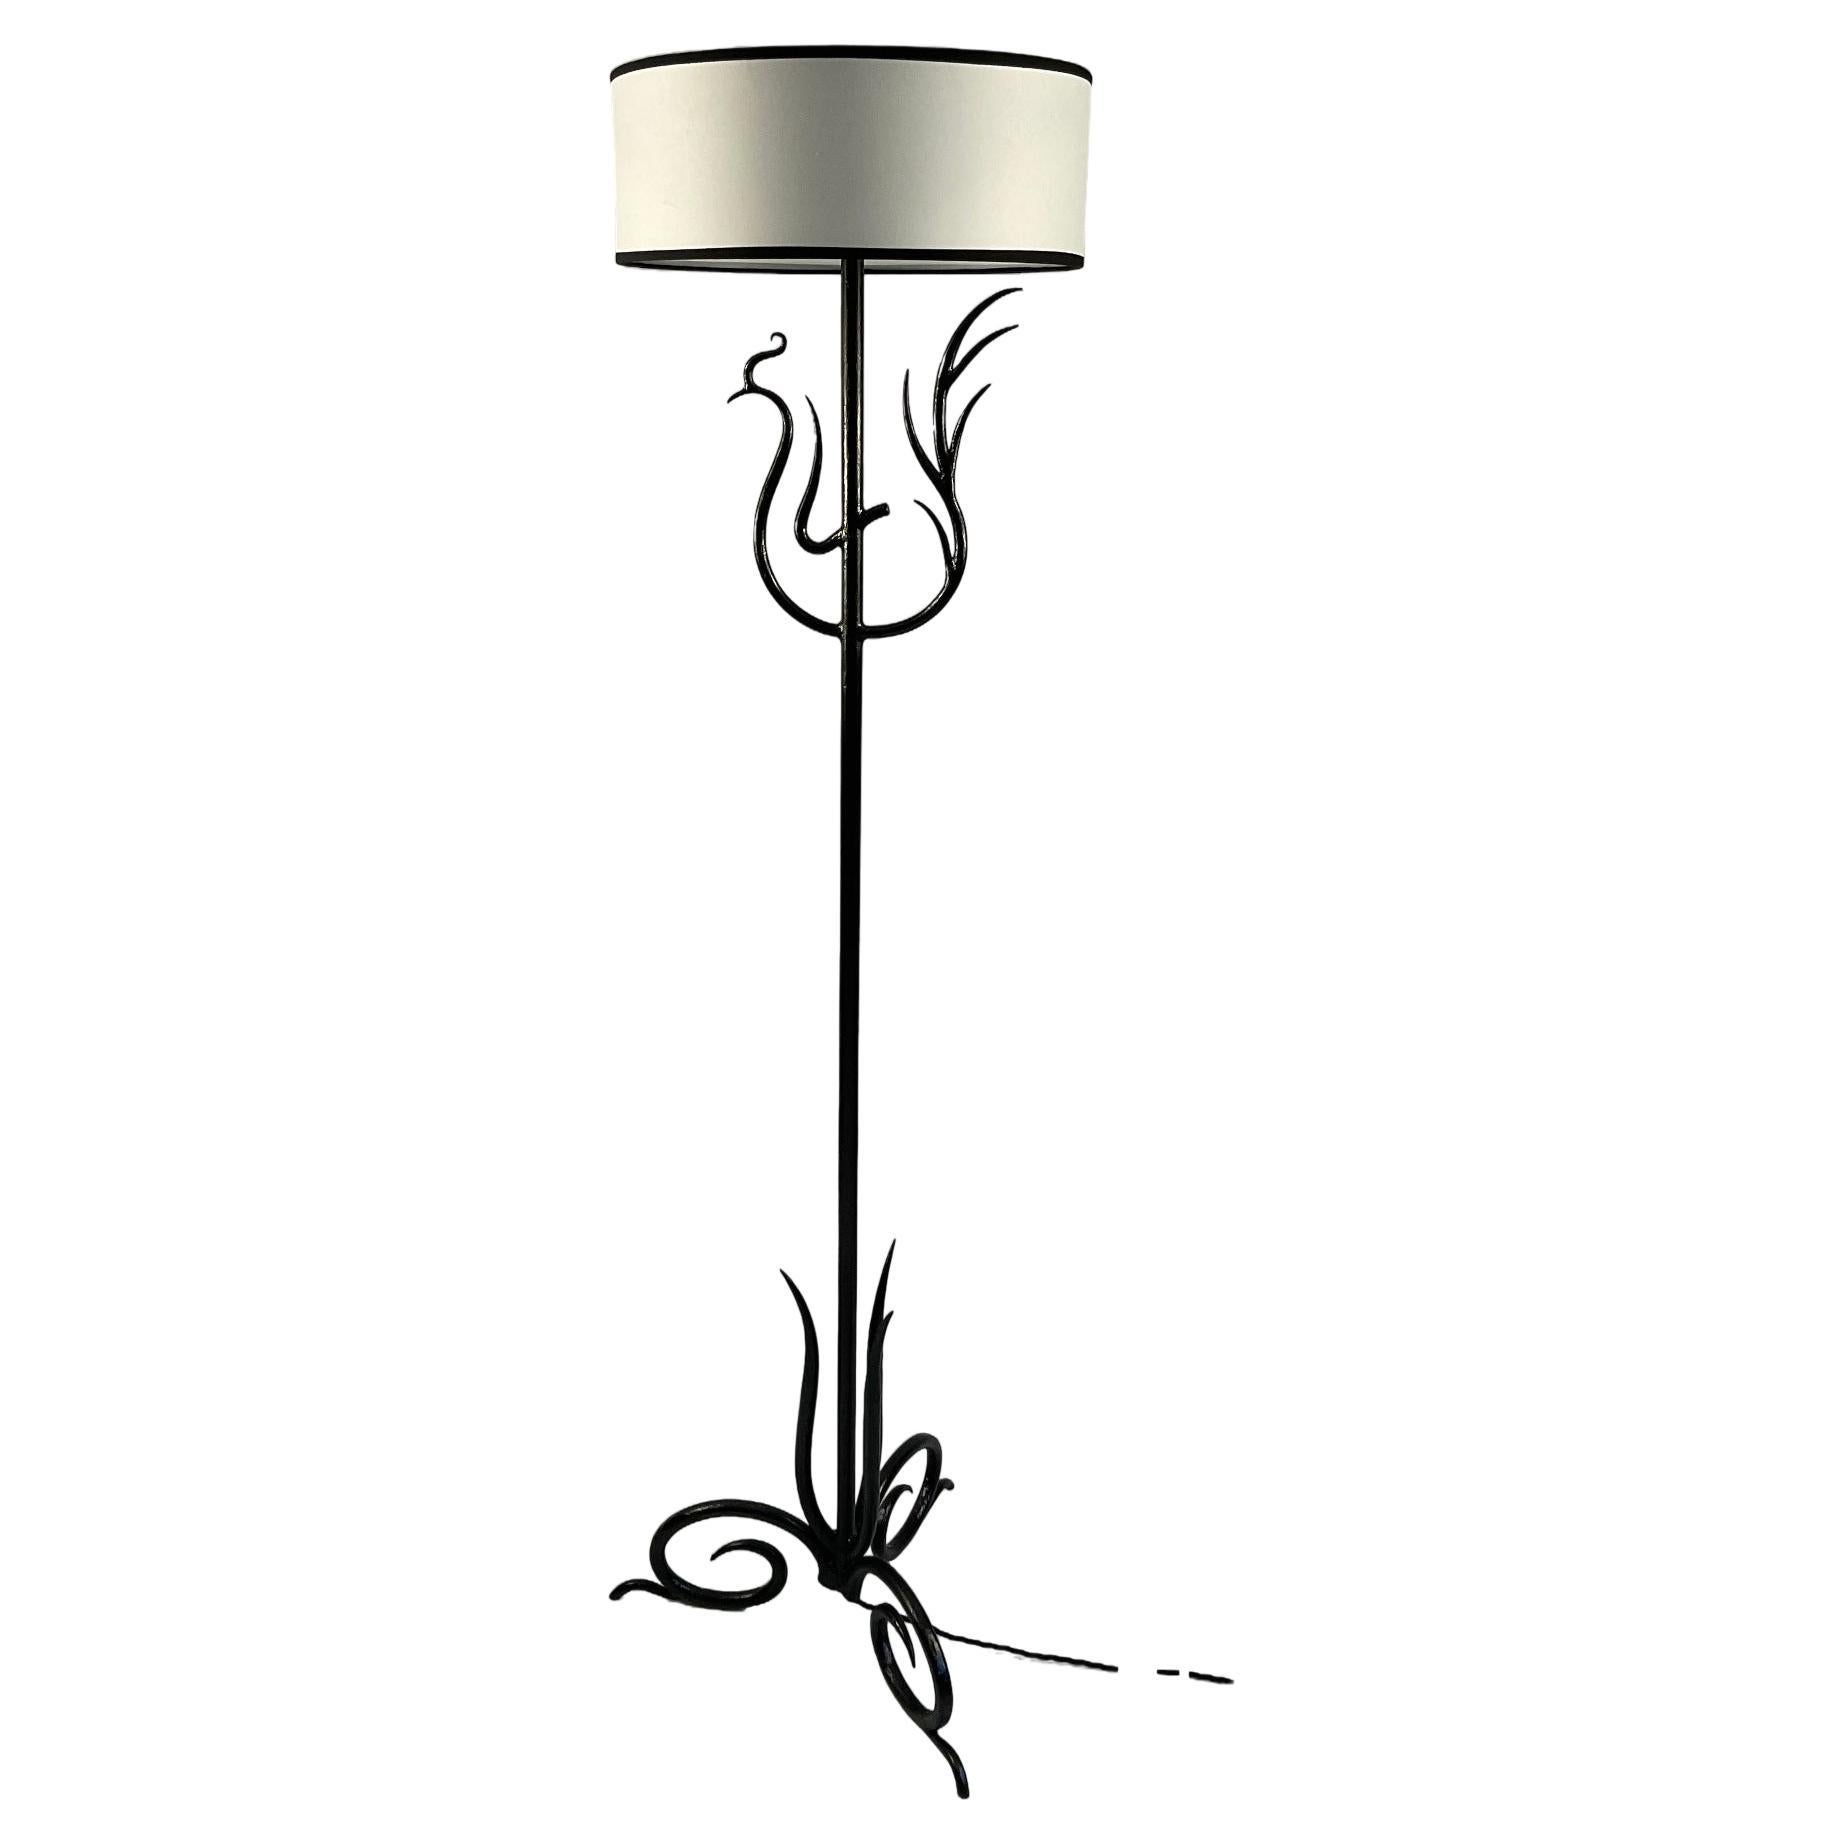 1940s French Wrought Iron Floor Lamp with a Design of a Phoenix. 